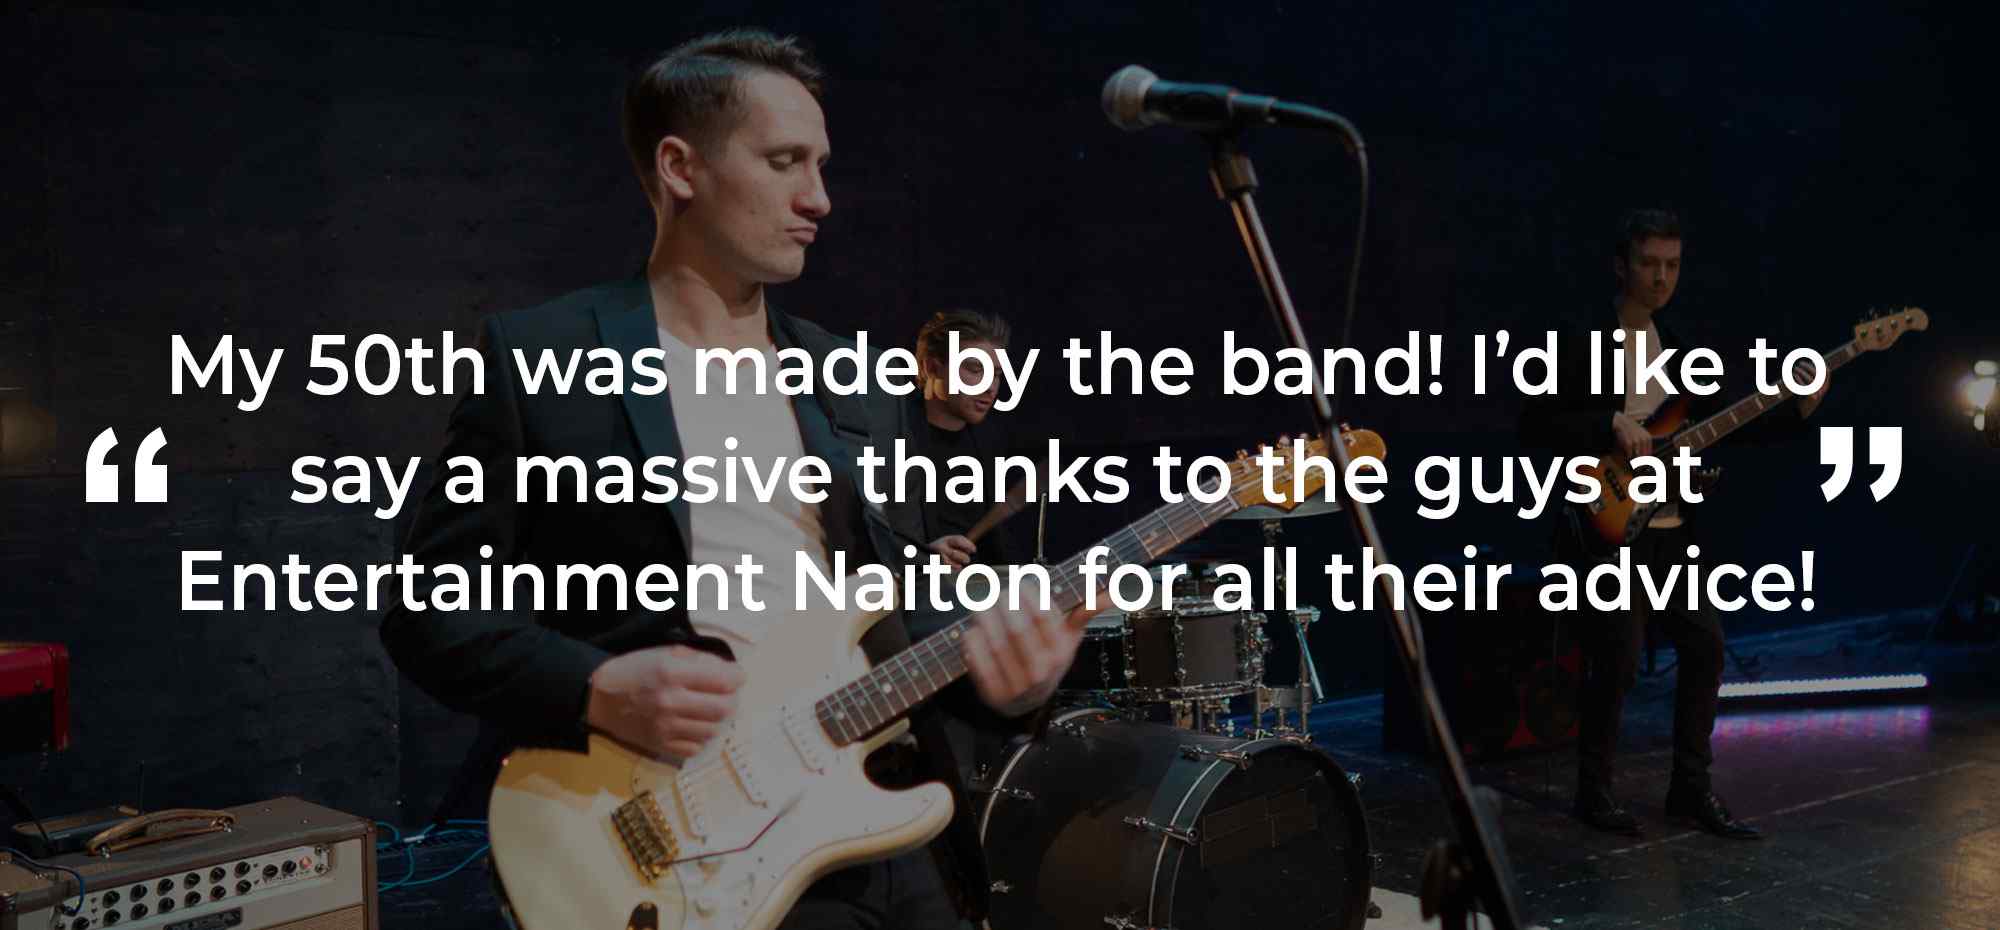 Client Review of a Party Band Greater London